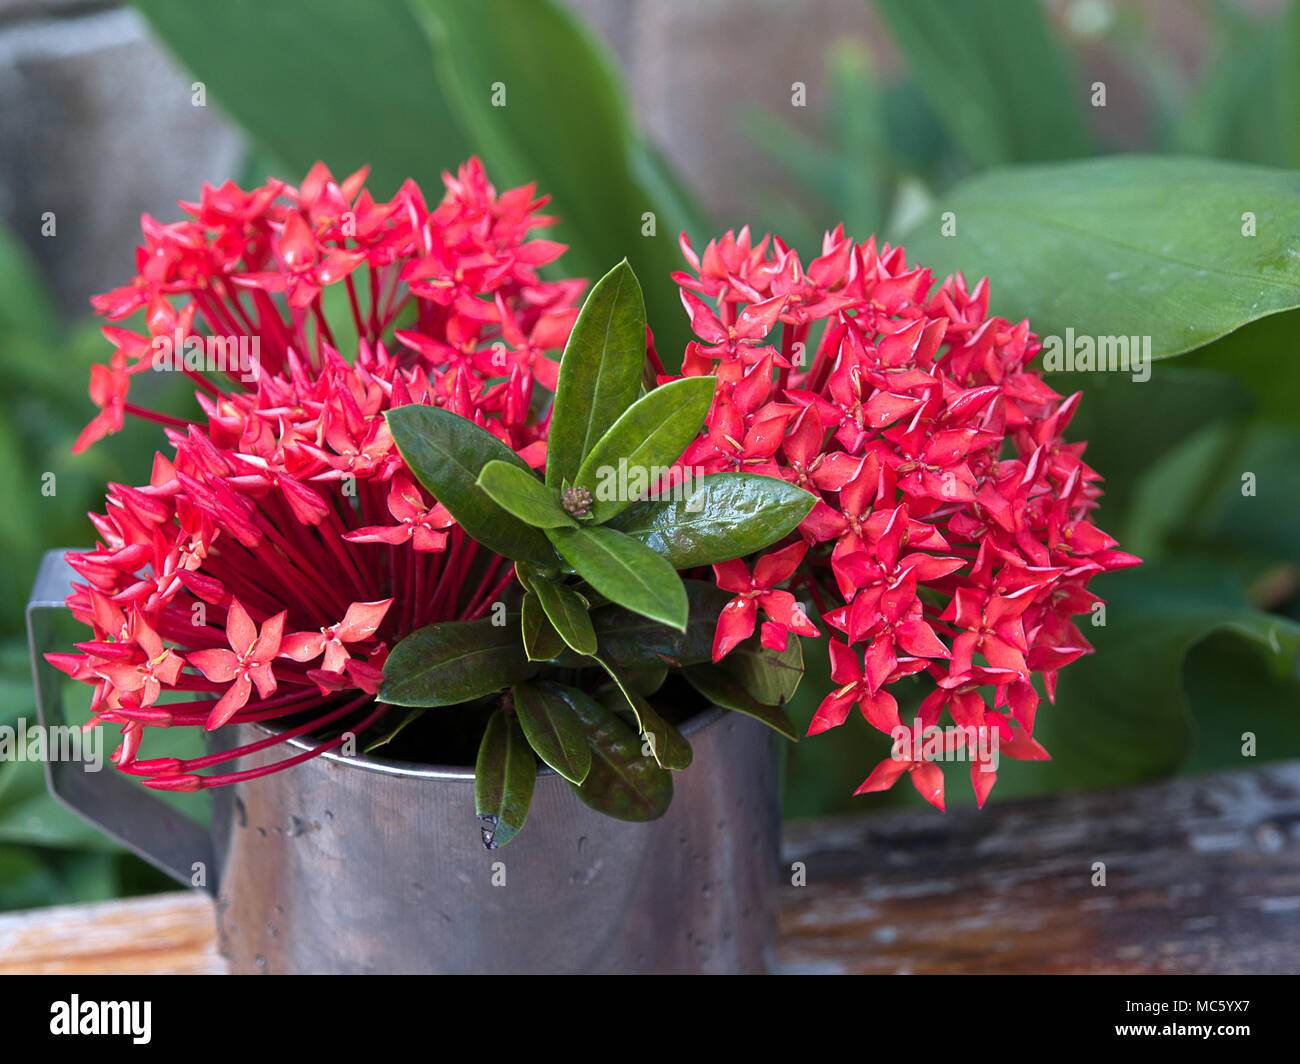 Ixora , Spike is a plant that needs full sun , Beauty in nature. Stock Photo